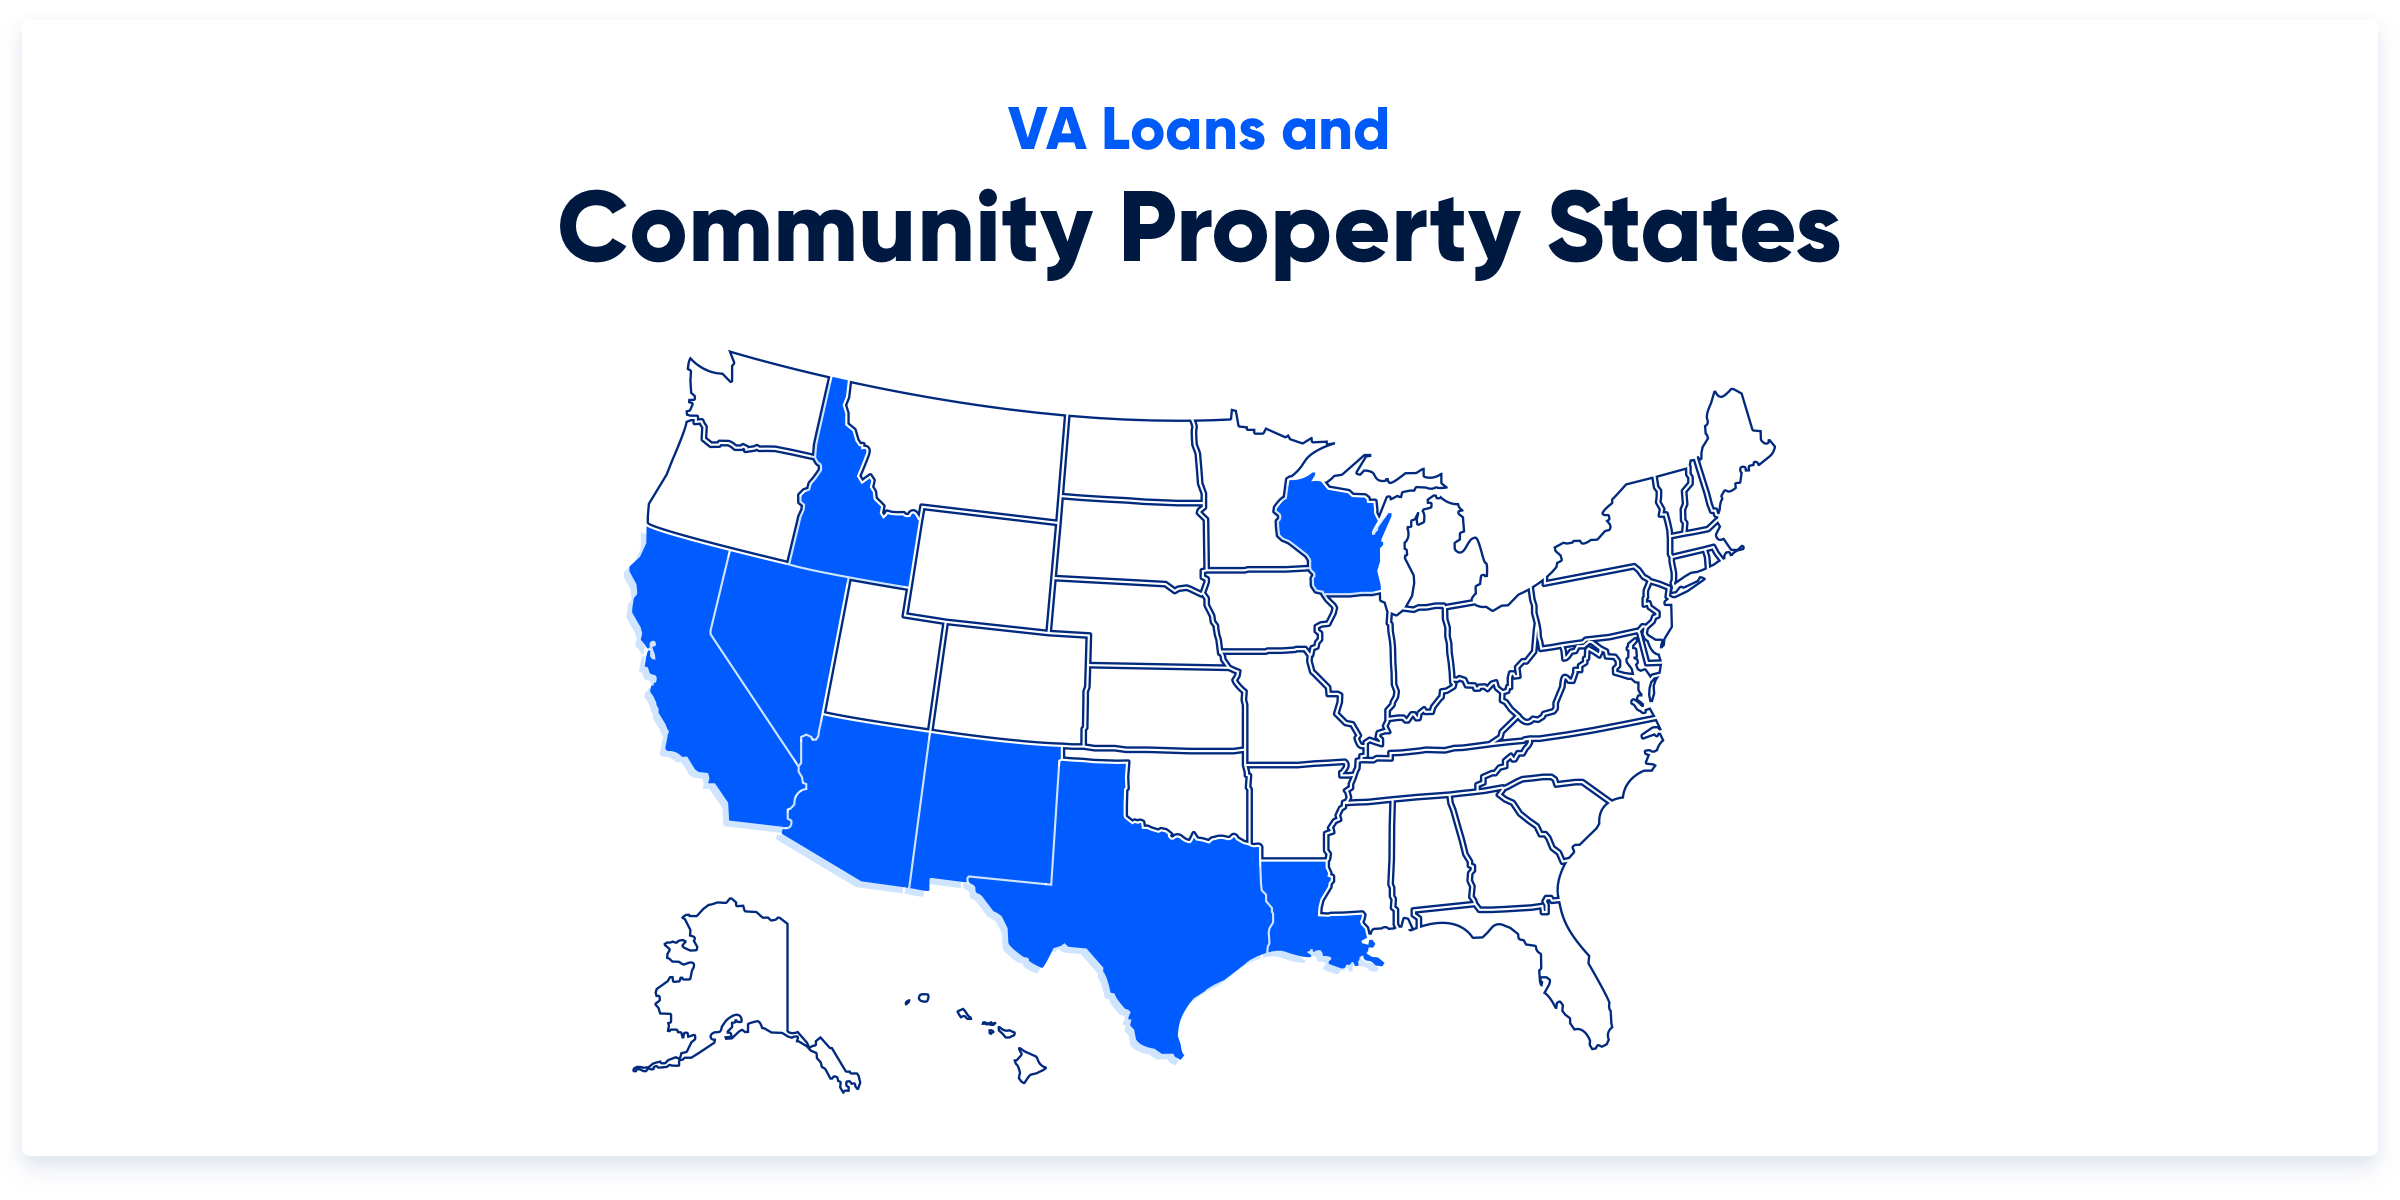 An illustration highlighting community property states in the U.S.